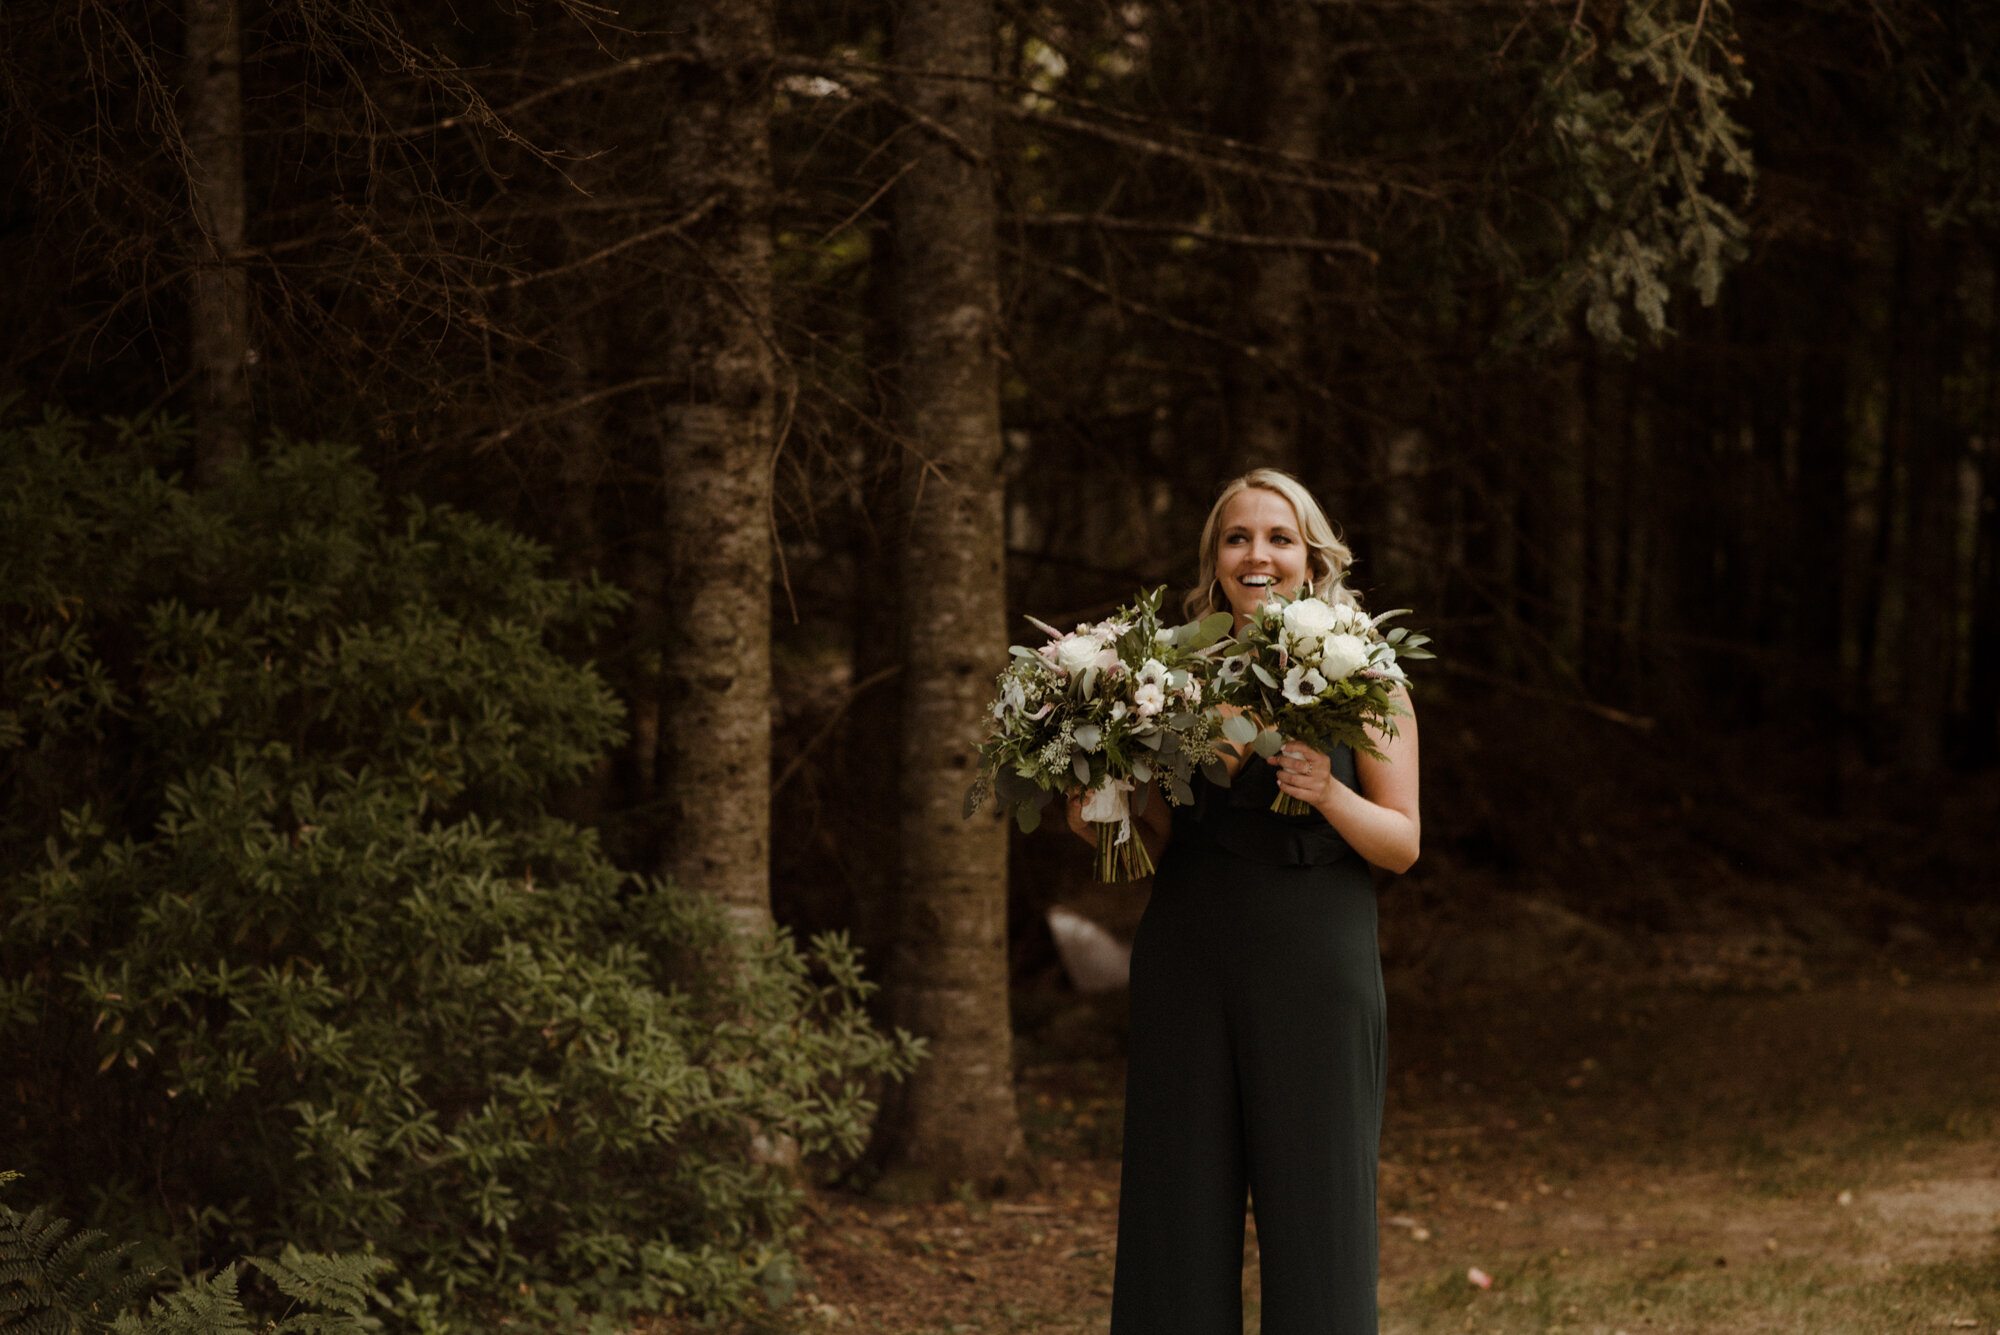 Autumn Elopement in New Hampshire - Backyard Wedding during COVID and Sunrise Hike in Wedding Dress - White Sails Creative_55.jpg